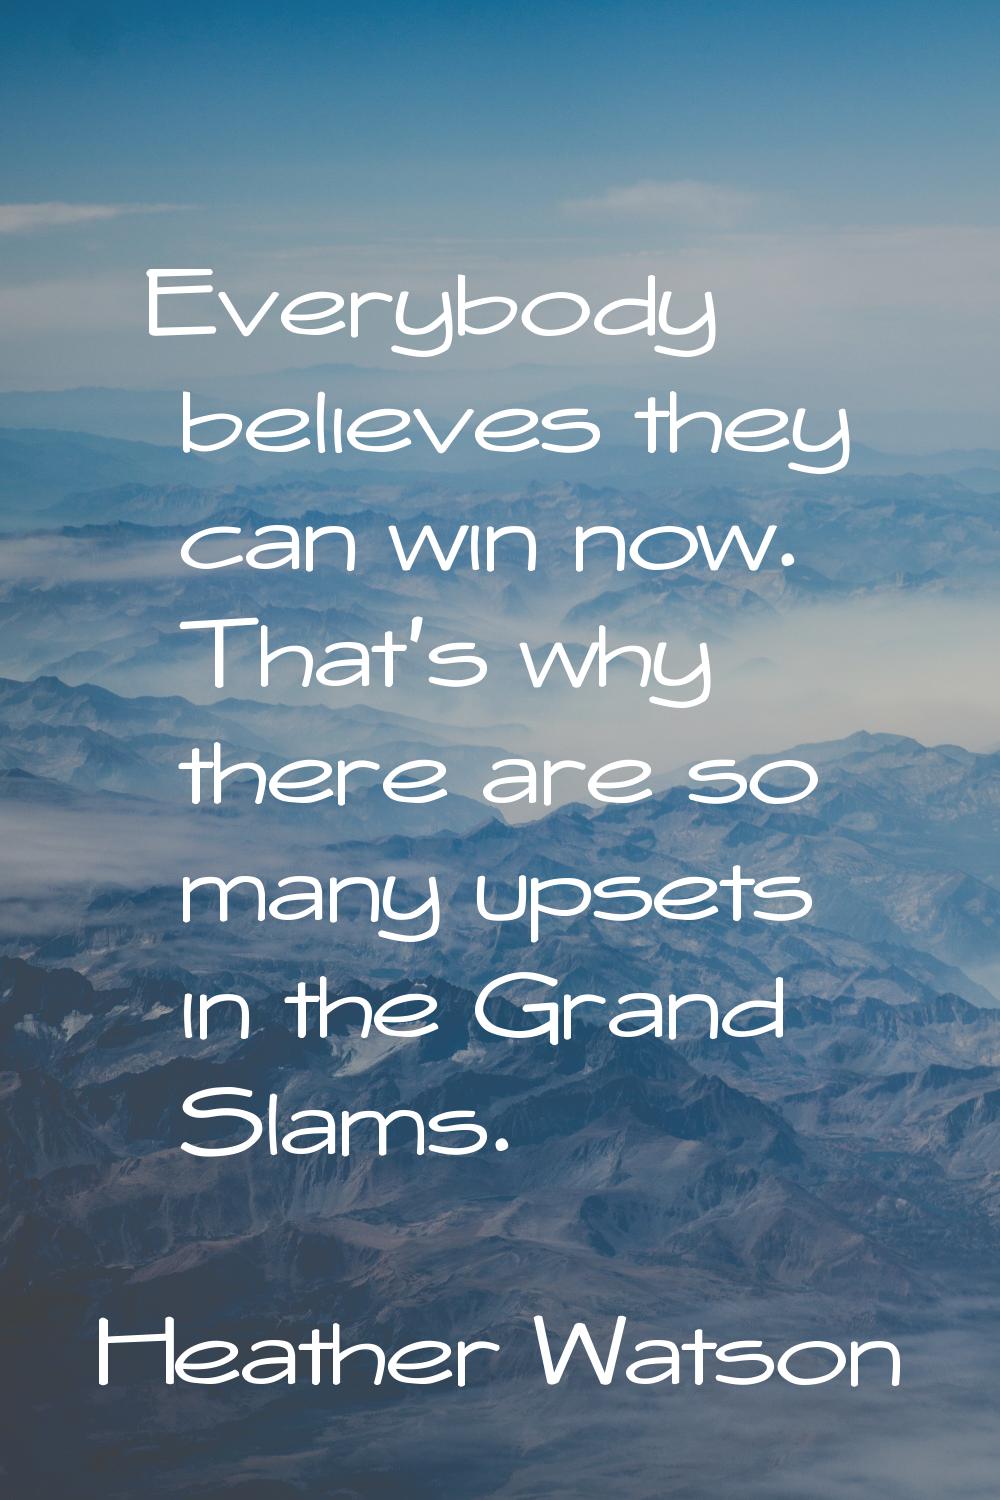 Everybody believes they can win now. That's why there are so many upsets in the Grand Slams.